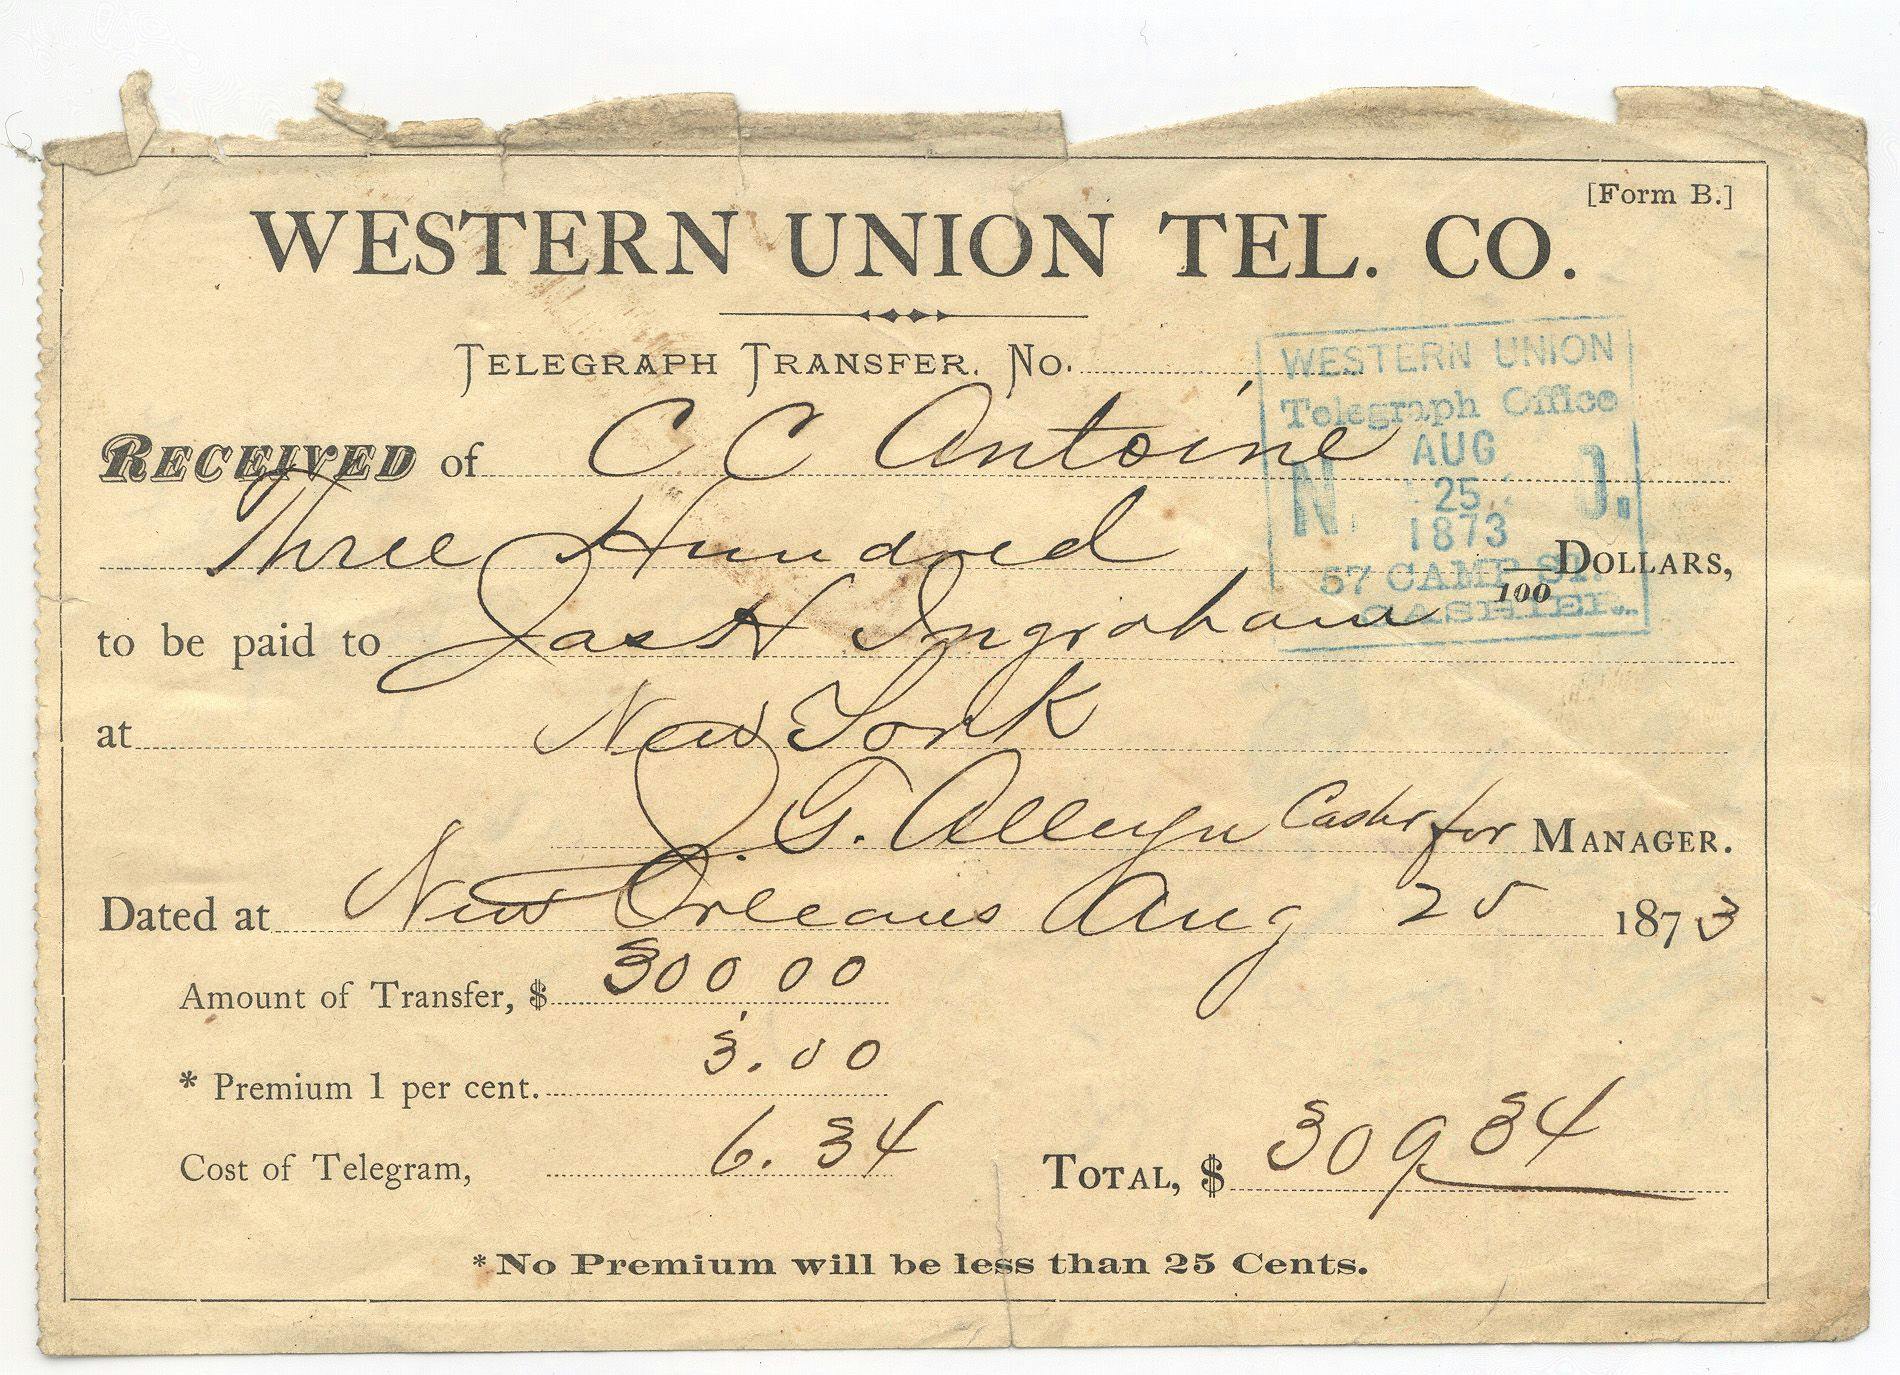 Image of Western Union wire transfer from 1873